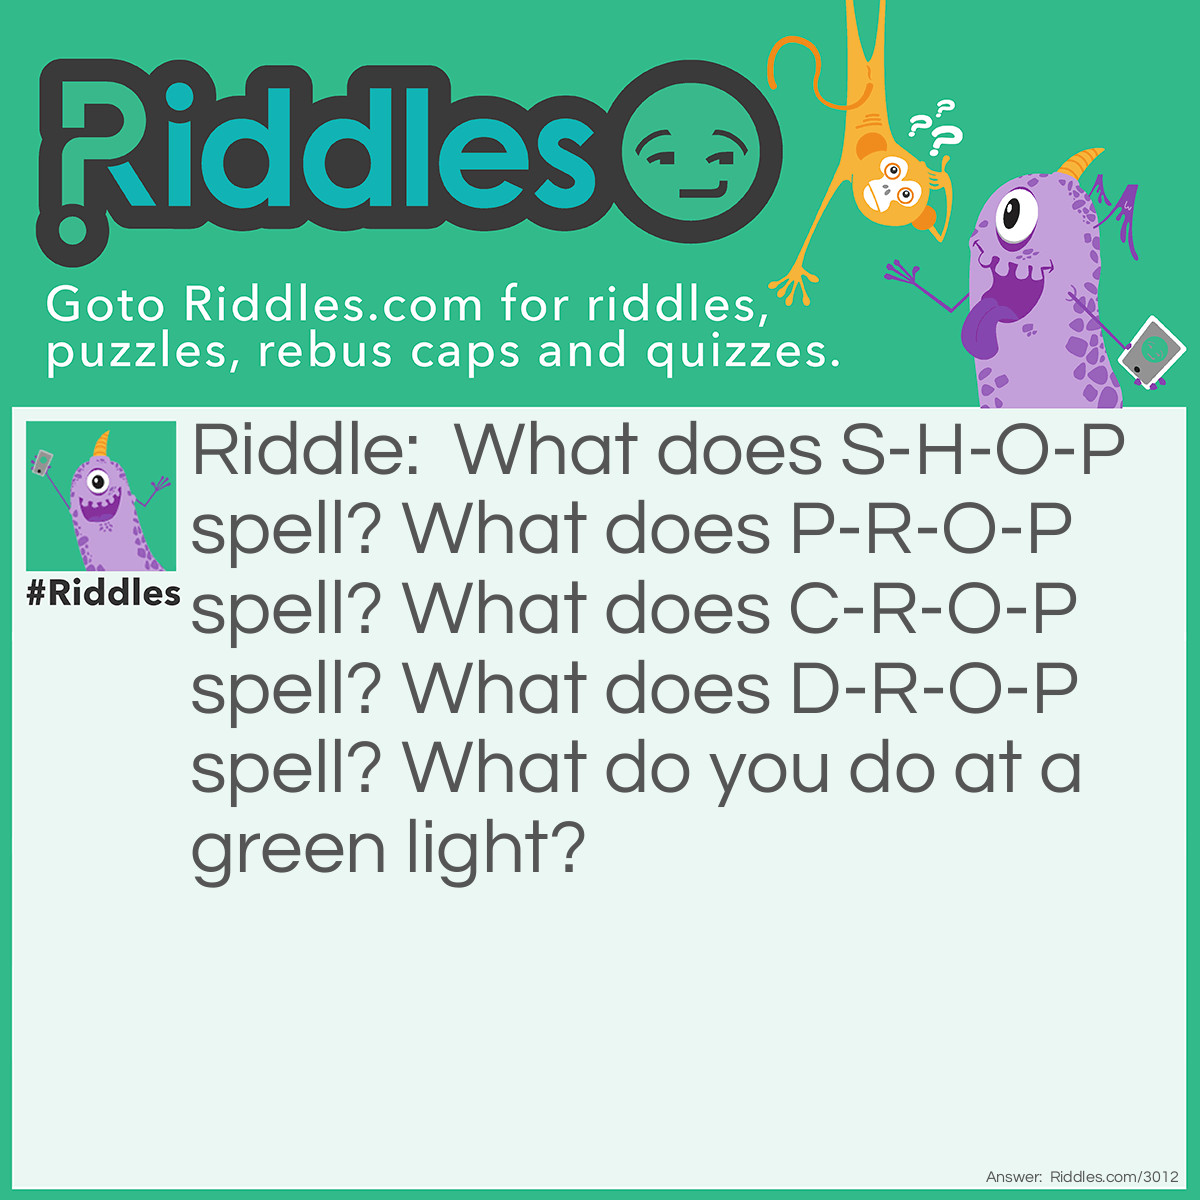 Riddle: What does S-H-O-P spell? What does P-R-O-P spell? What does C-R-O-P spell? What does D-R-O-P spell? What do you do at a green light? Answer: Go.